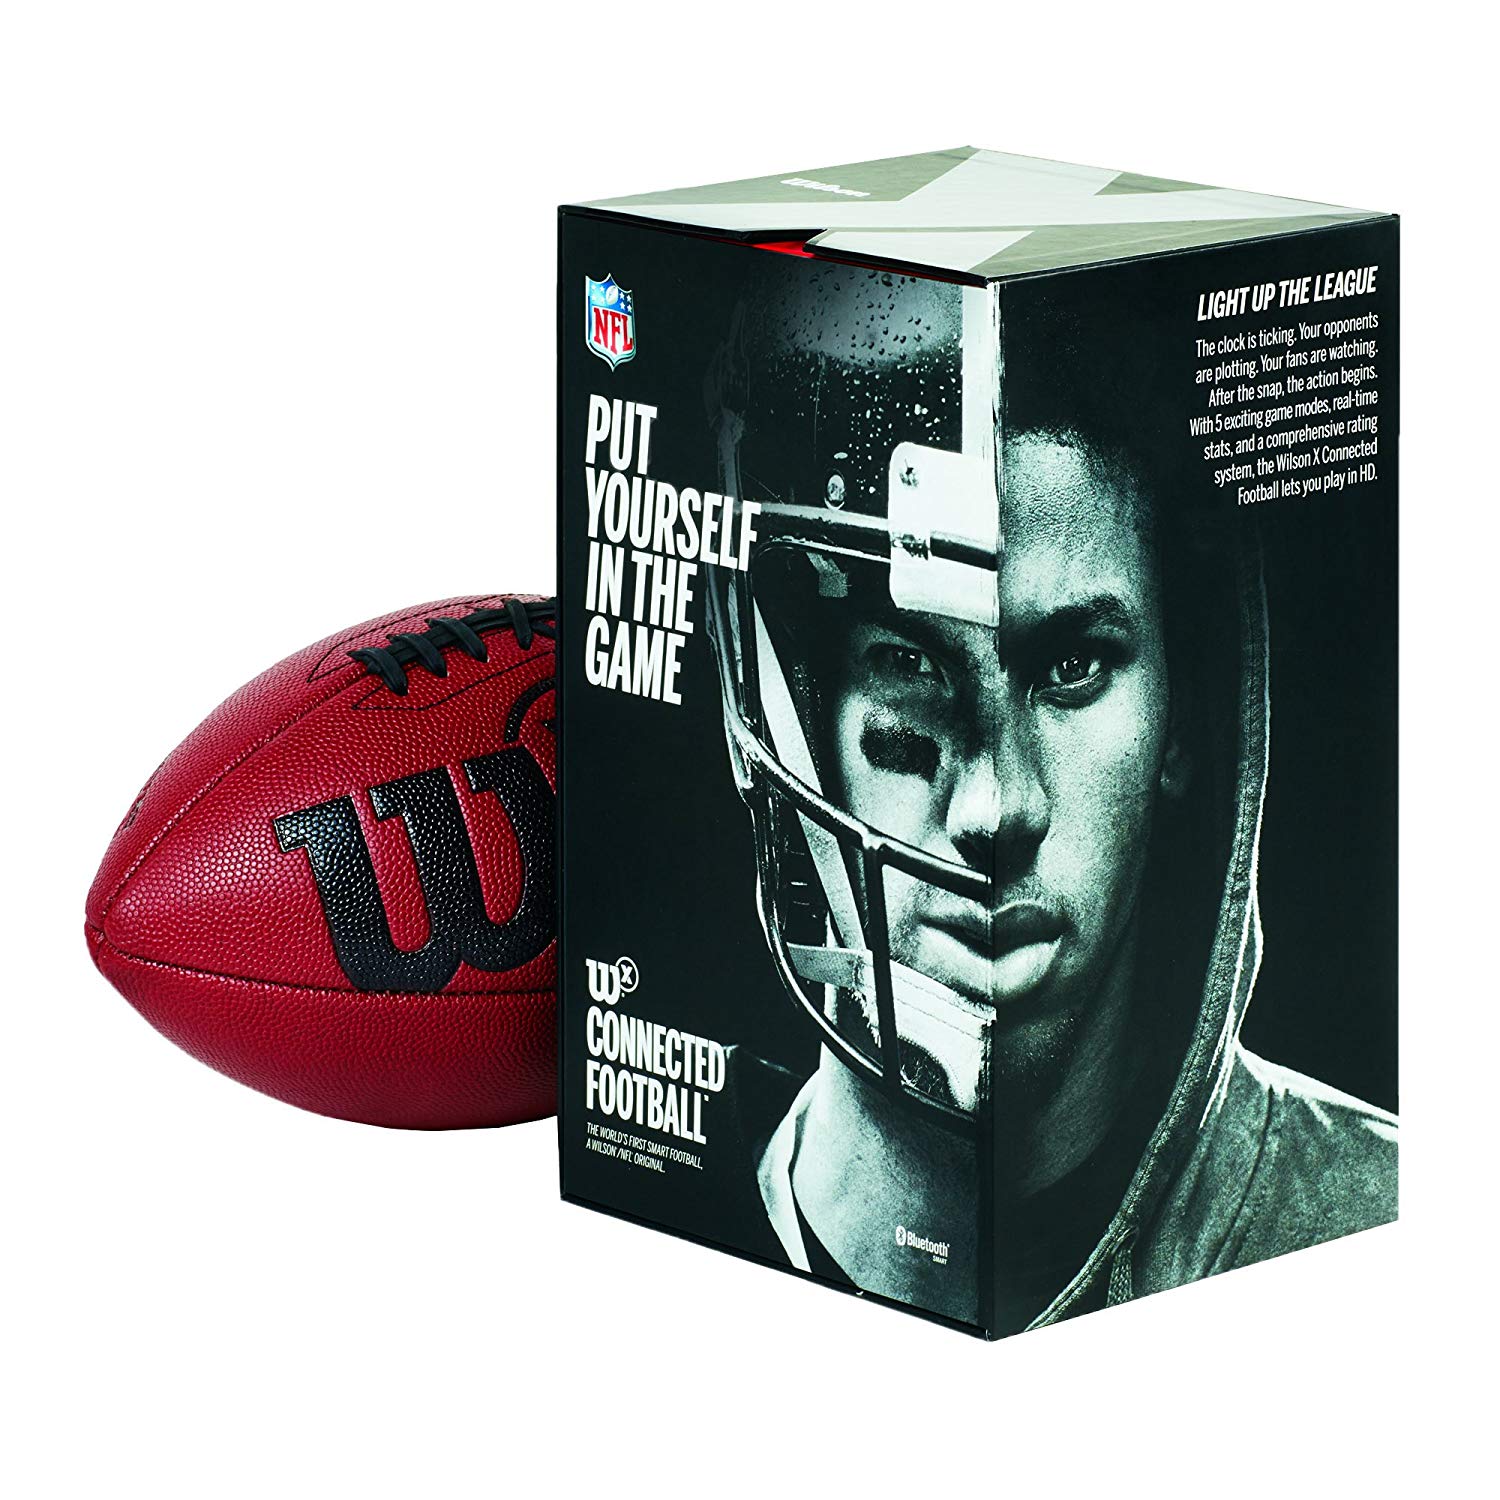 The Wilson X Smart Football just outside its packaging.